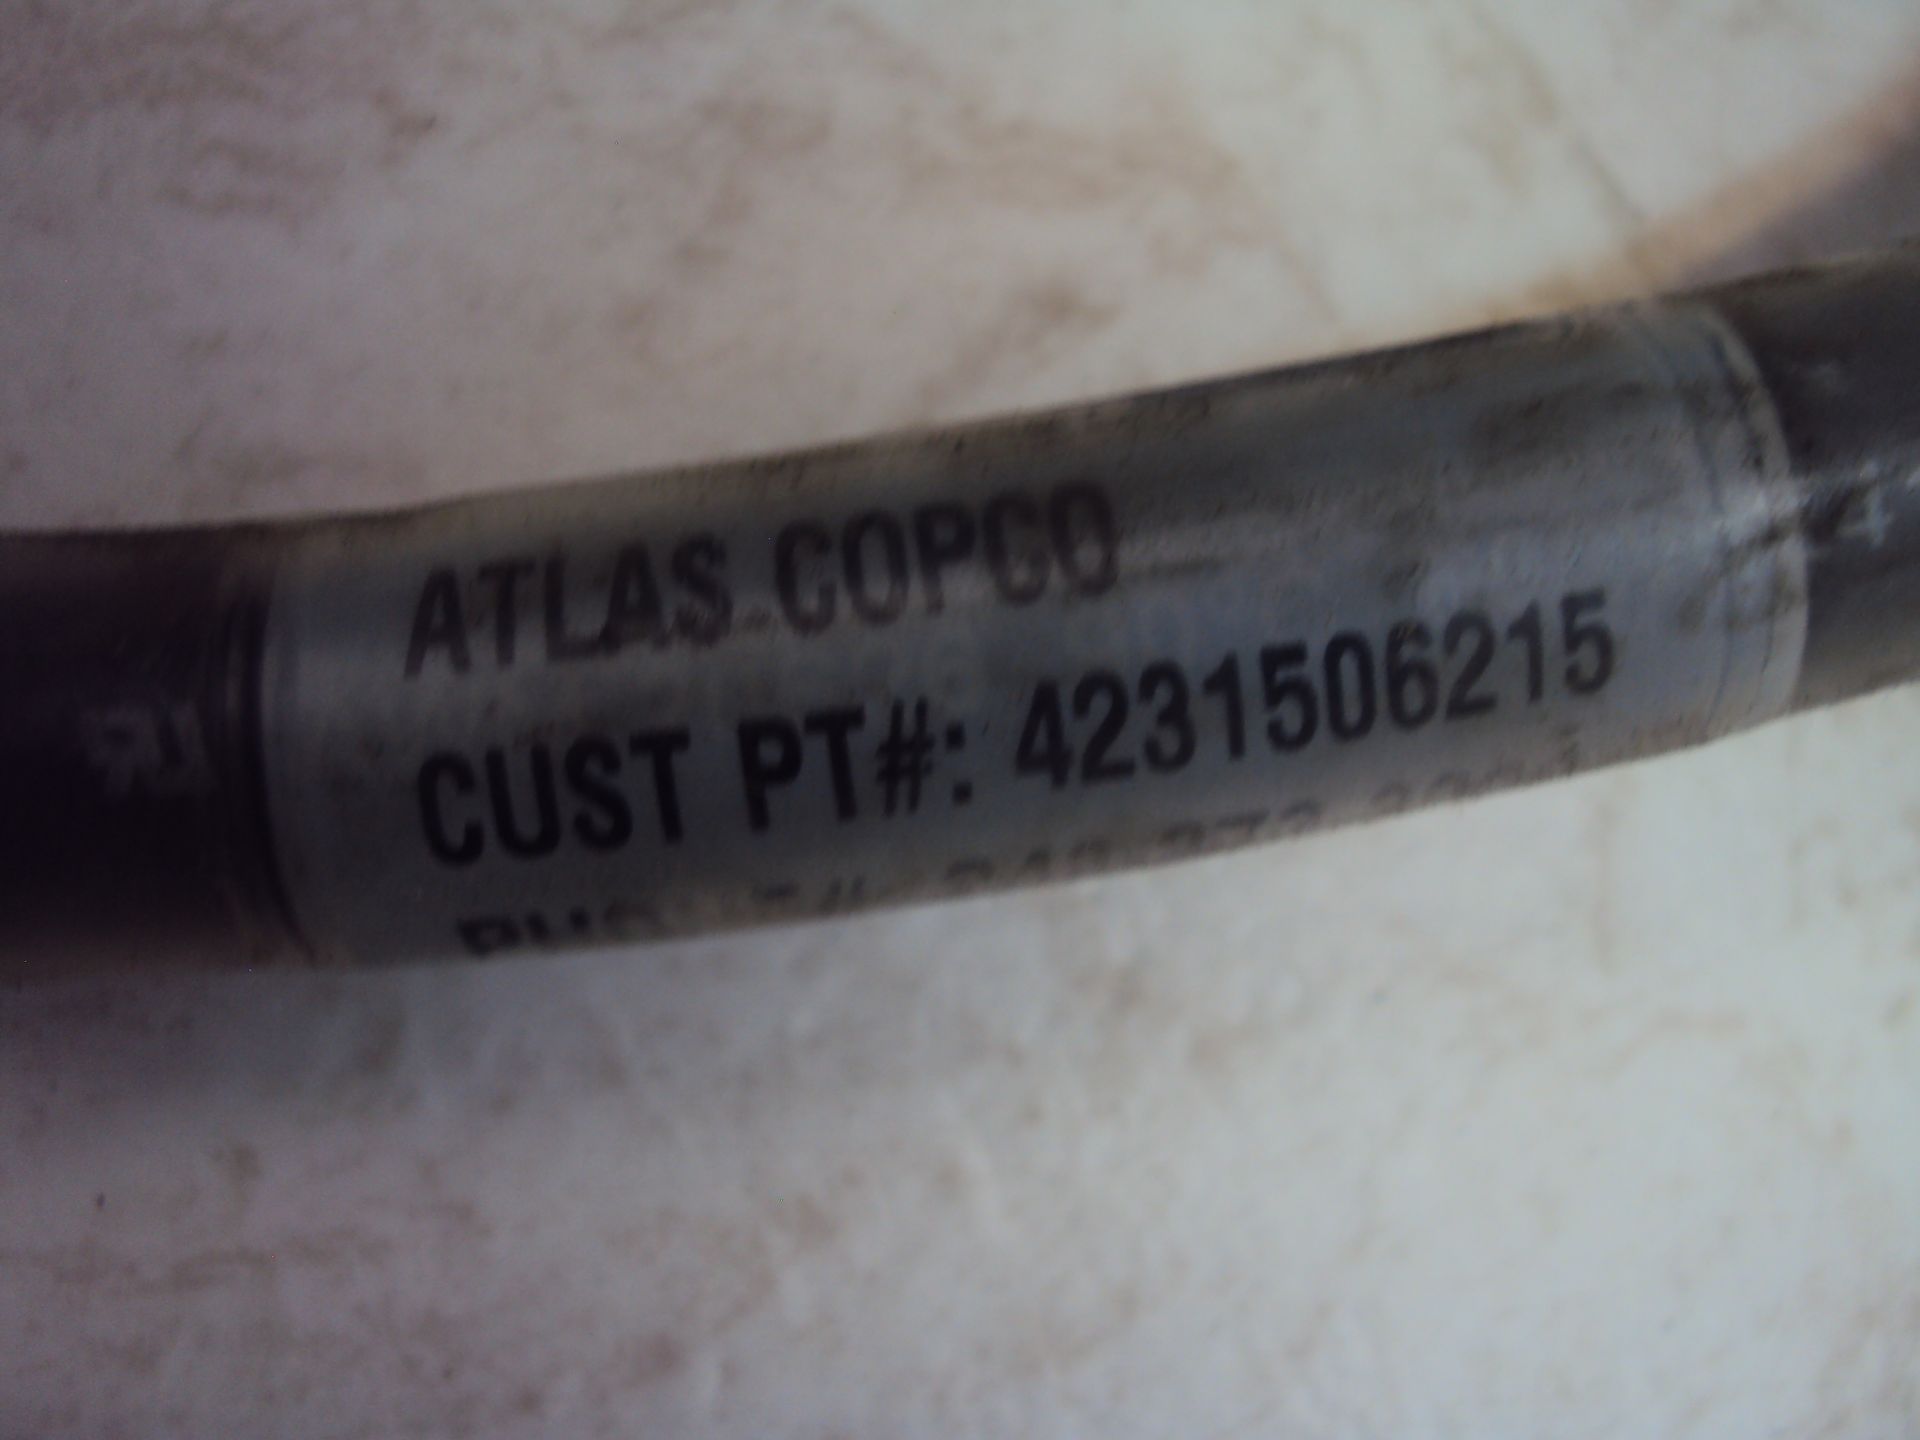 (2) Atlas Copco 4231506215 Nutrunner to Controller Cables - Image 4 of 5